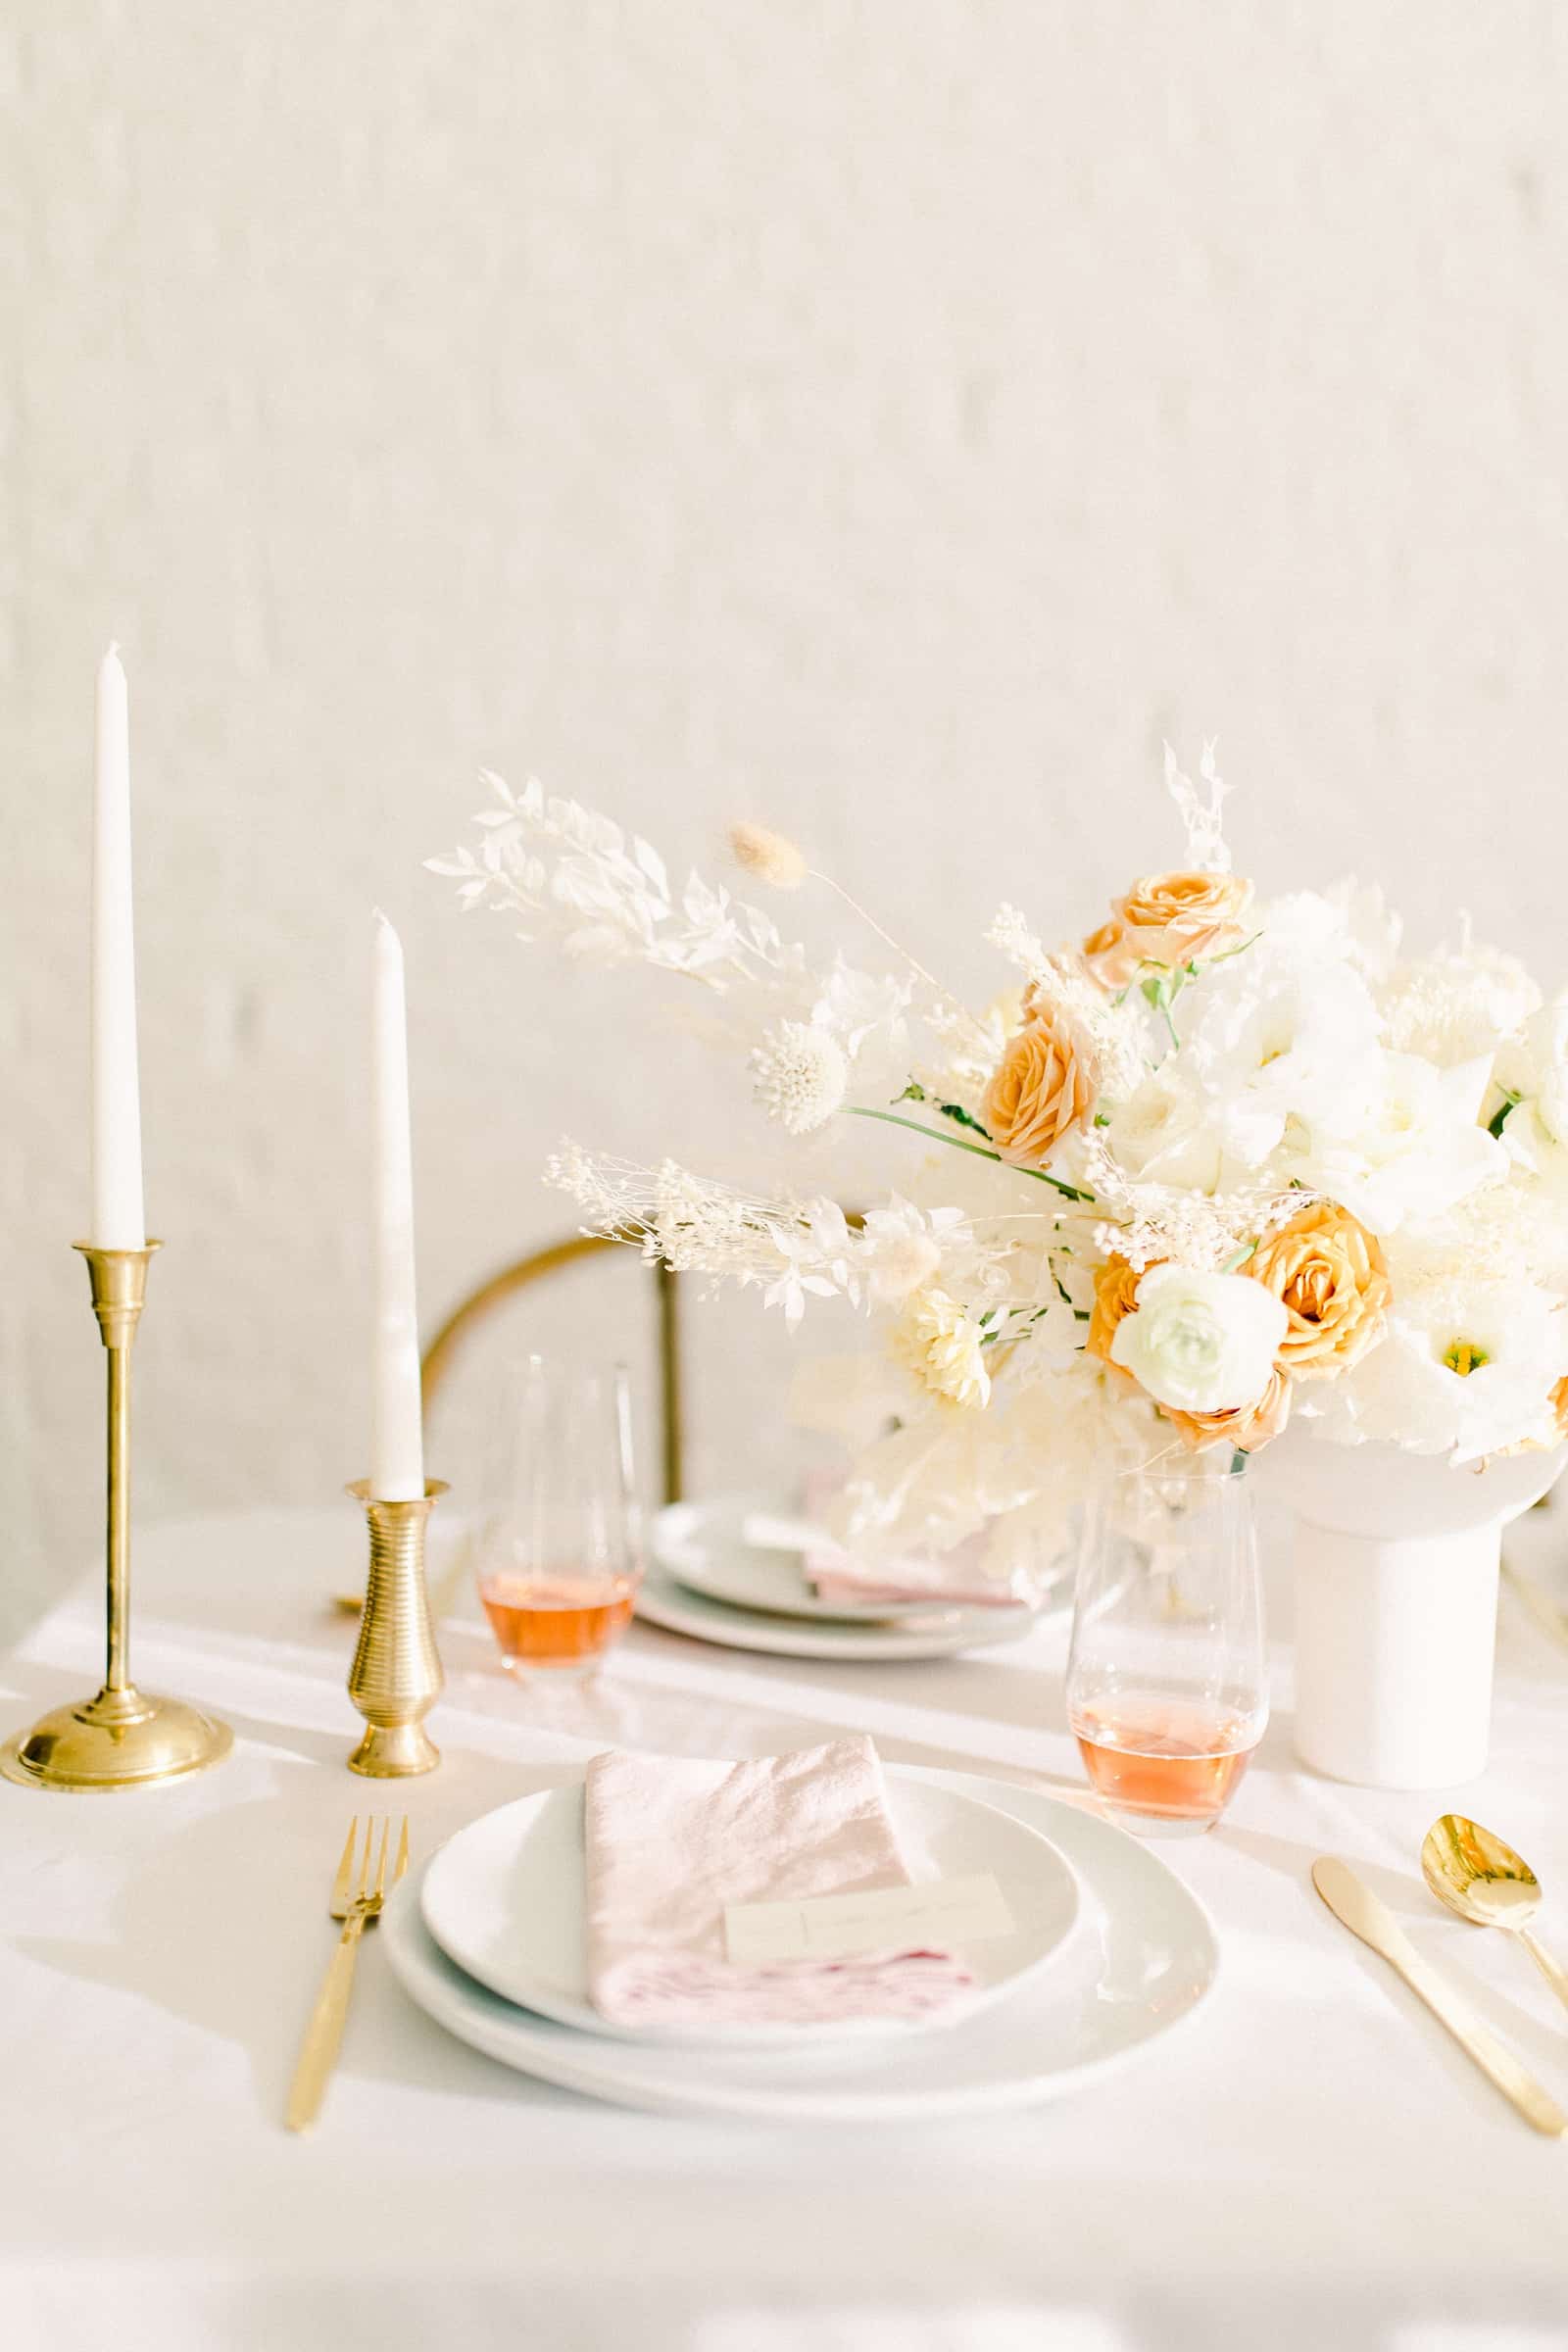 Modern wedding table with white and orange rust colors, white flowers tablescape